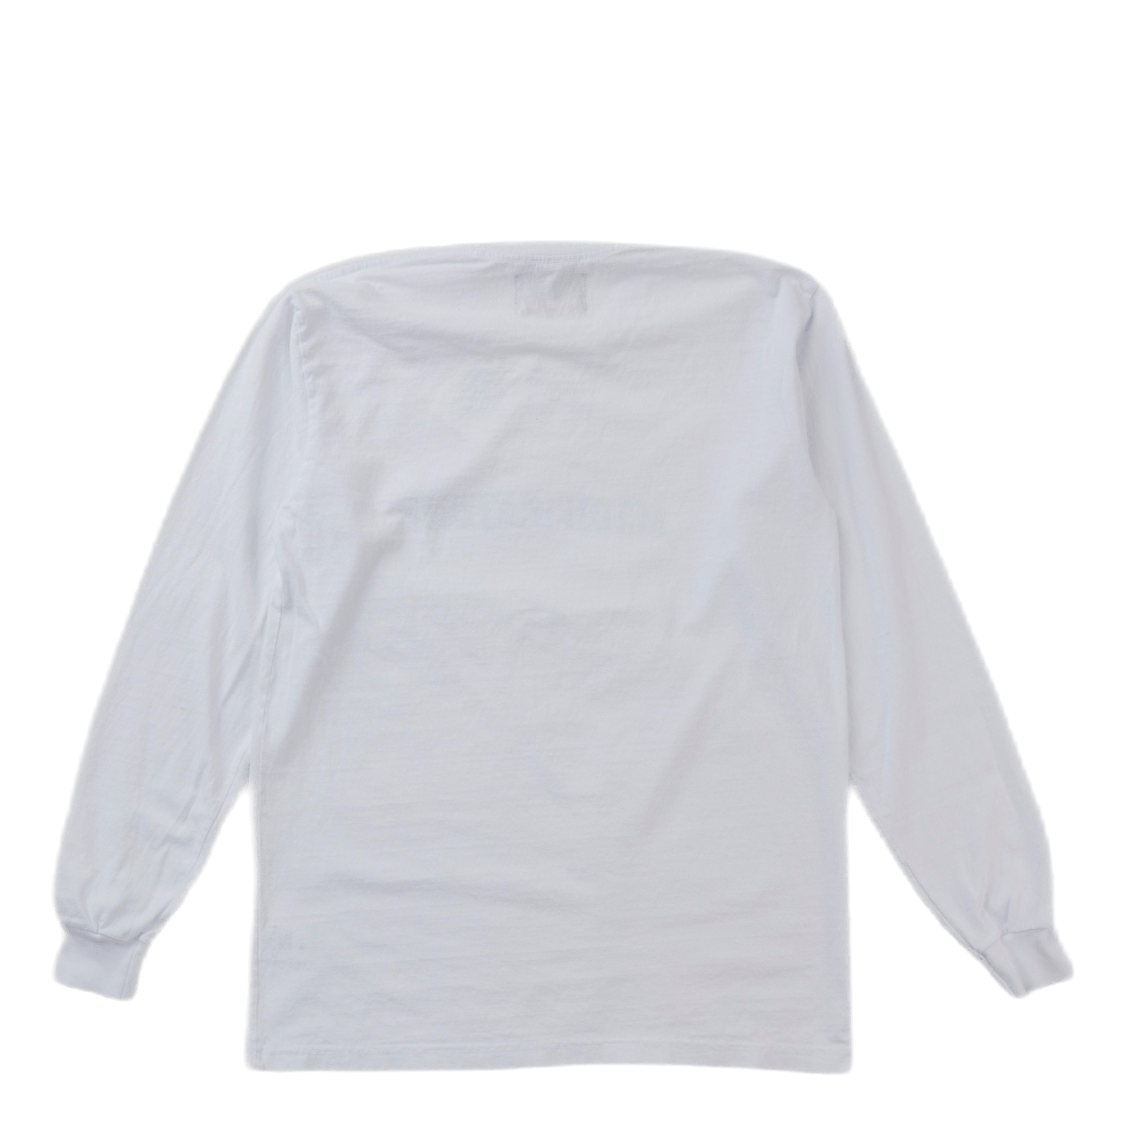 Accidification Recycled Longsl White